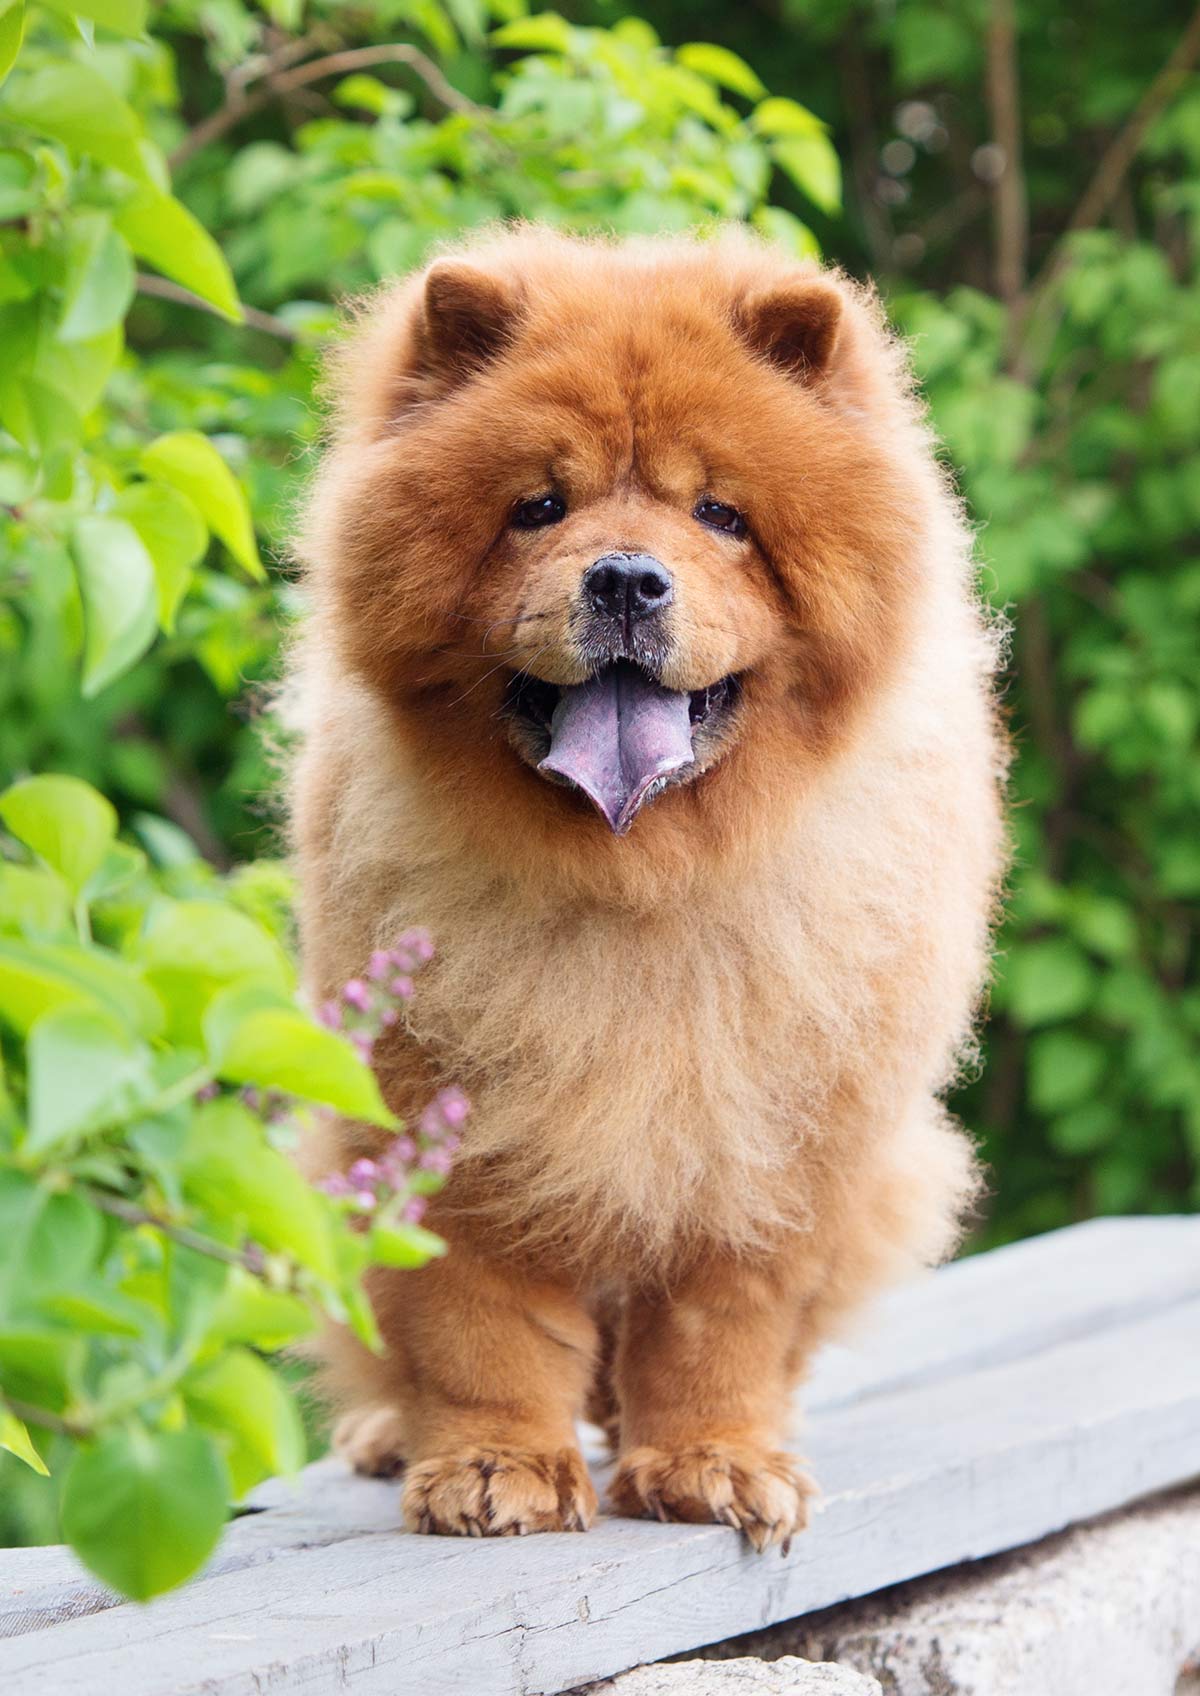 The Chow Chow Puffy Lion Dog Dog Breeds Picture